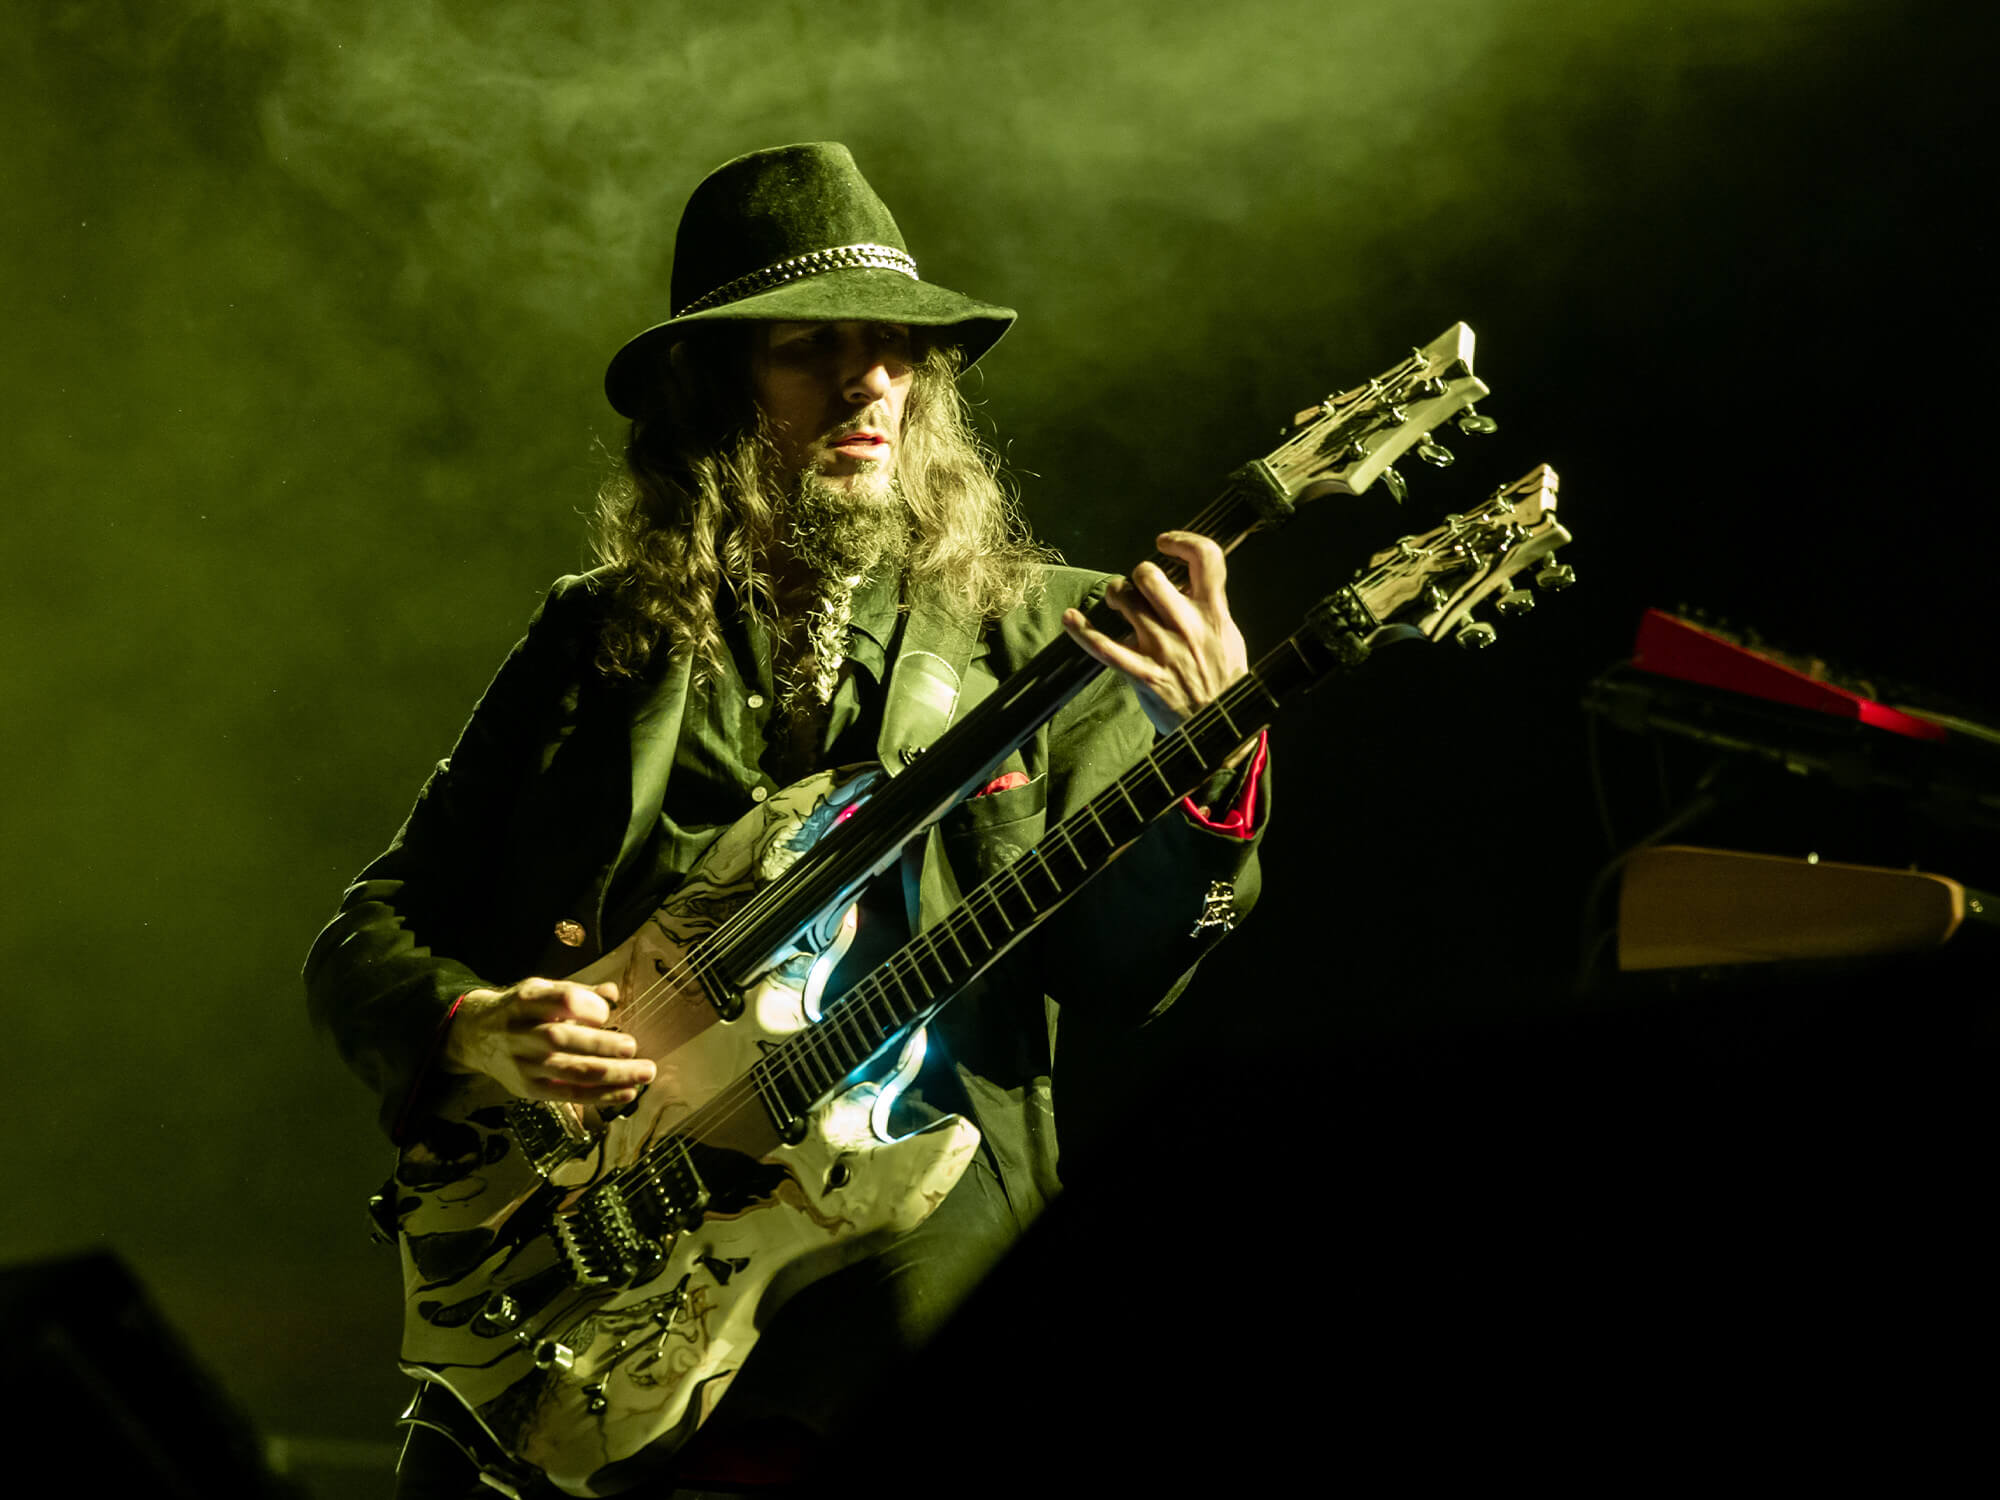 Bumblefoot playing a double neck guitar. He has long hair and is wearing a brown hat. He stands under green lighting.